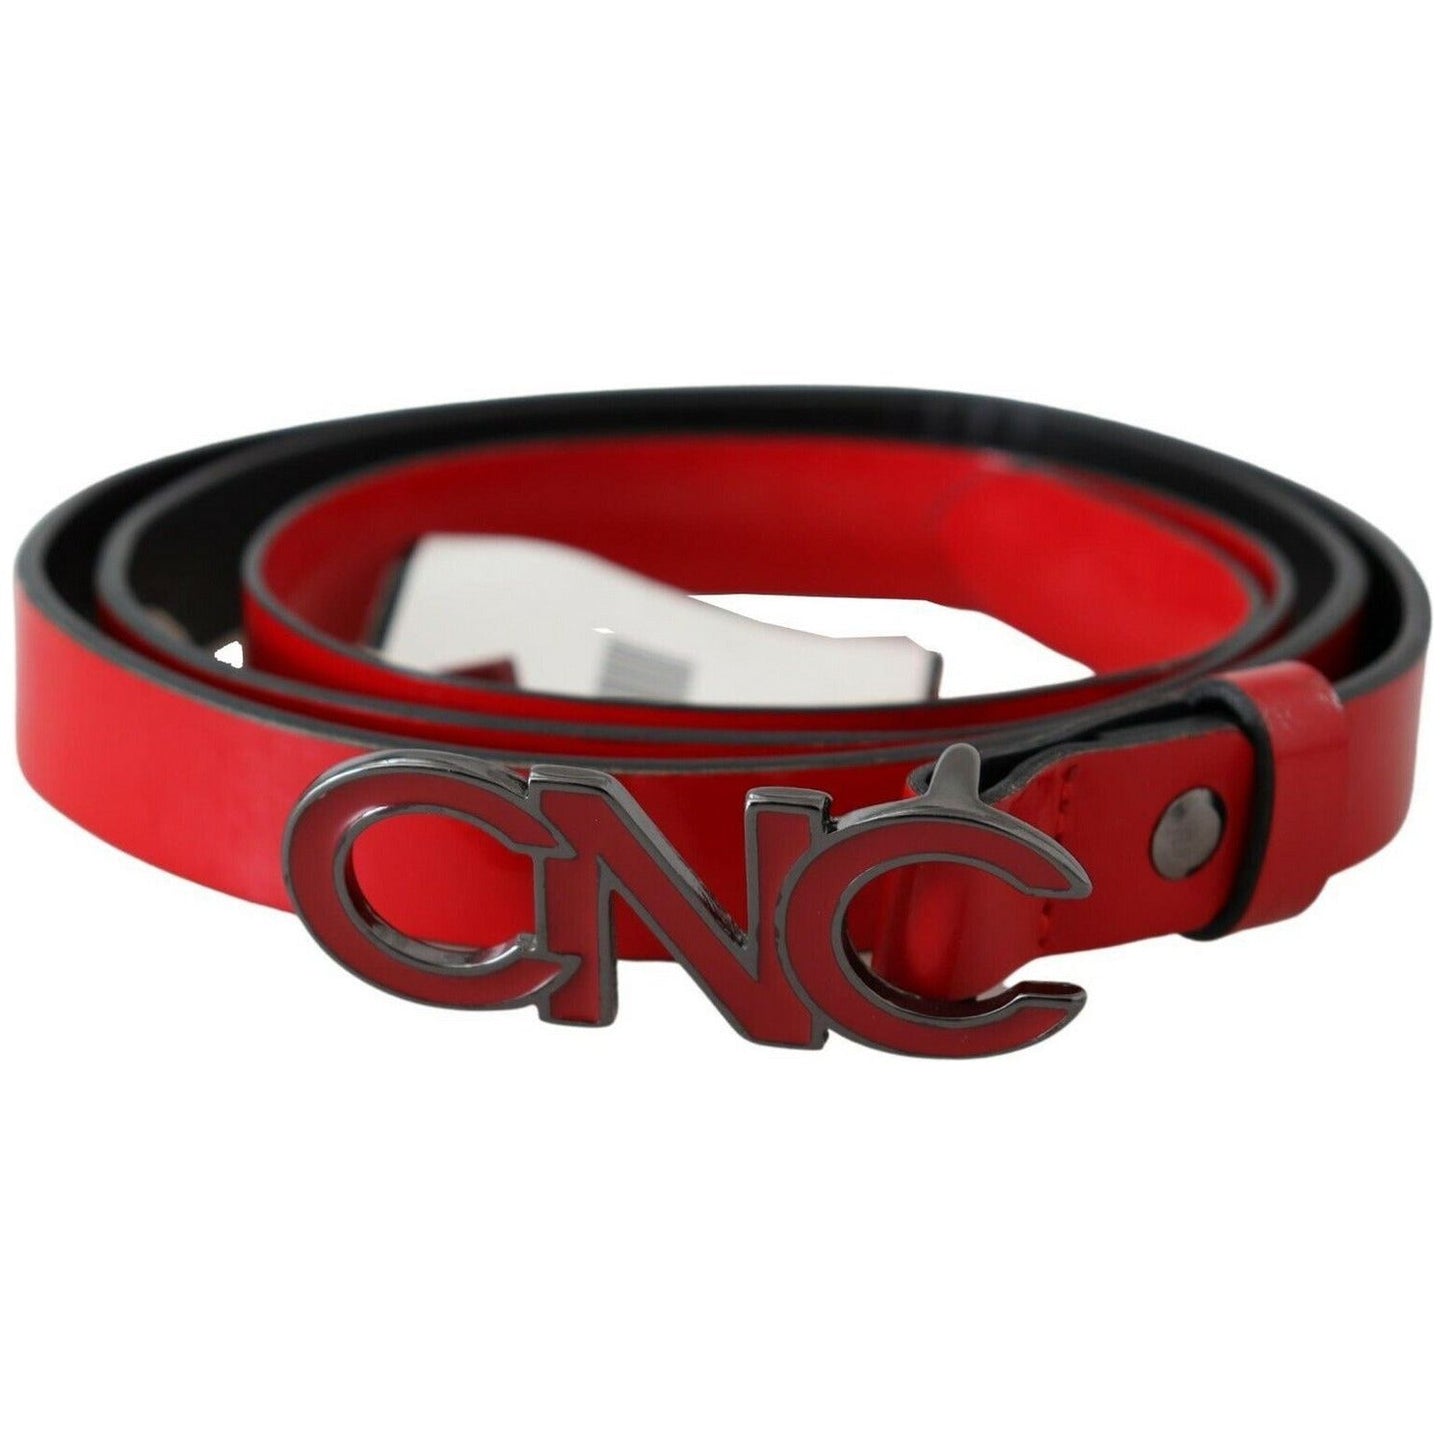 Costume National Chic Red Leather Waist Belt with Black-Tone Buckle WOMAN BELTS red-black-reversible-leather-logo-buckle-belt